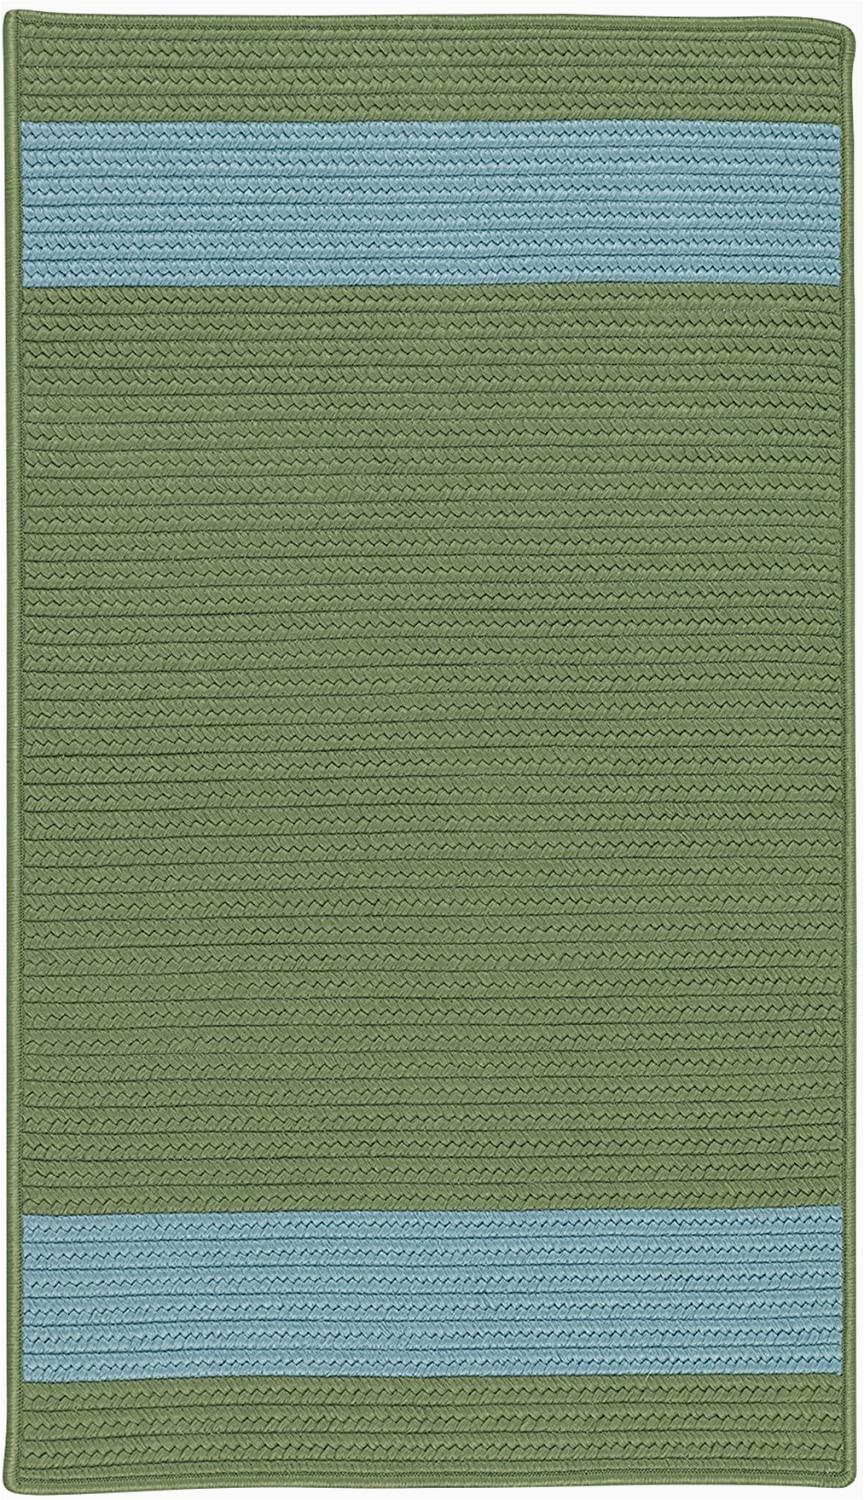 Blue and Green Rug 8 X 10 Amazon Com Colonial Mills Aurora area Rug 8 X 10 Moss